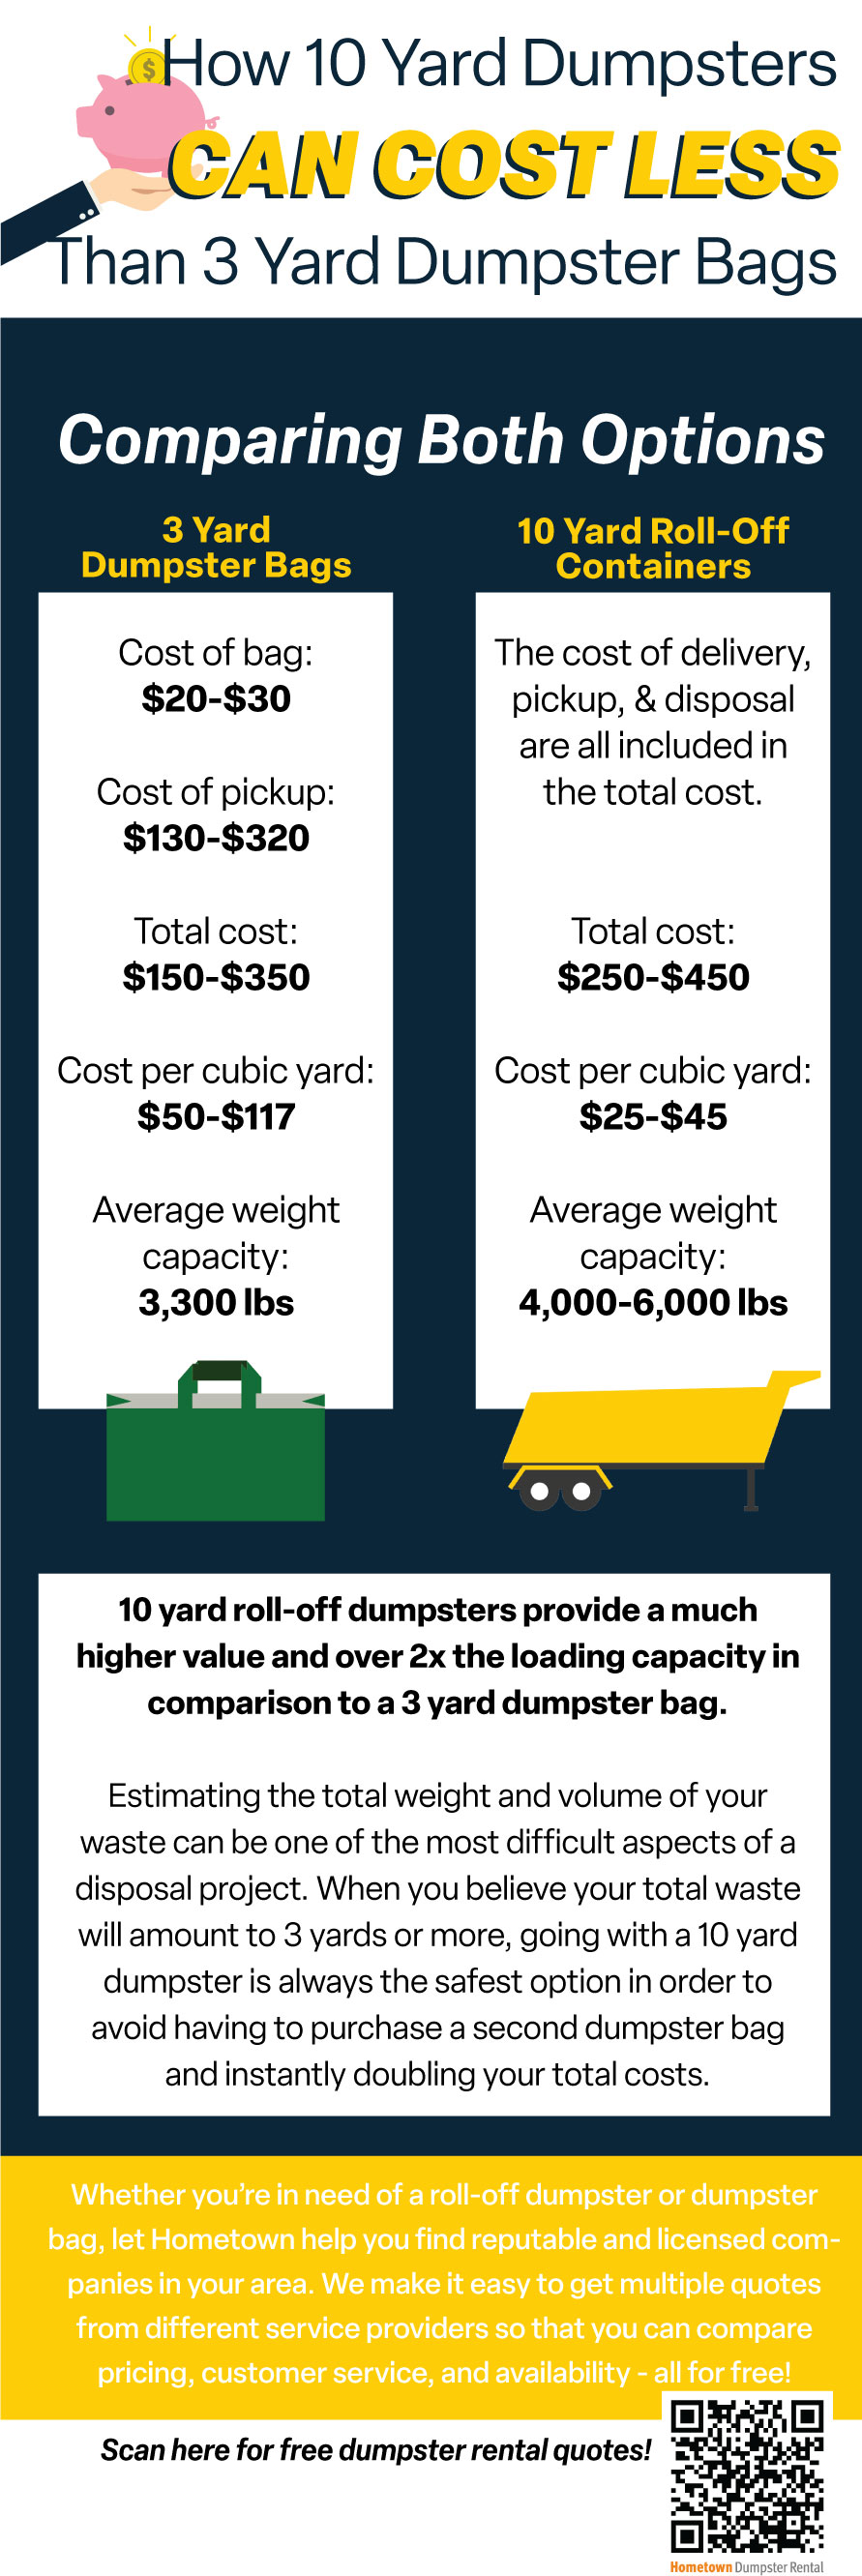 How 10 Yard Dumpsters Can Cost Less Than 3 Yard Bag Dumpsters Infographic